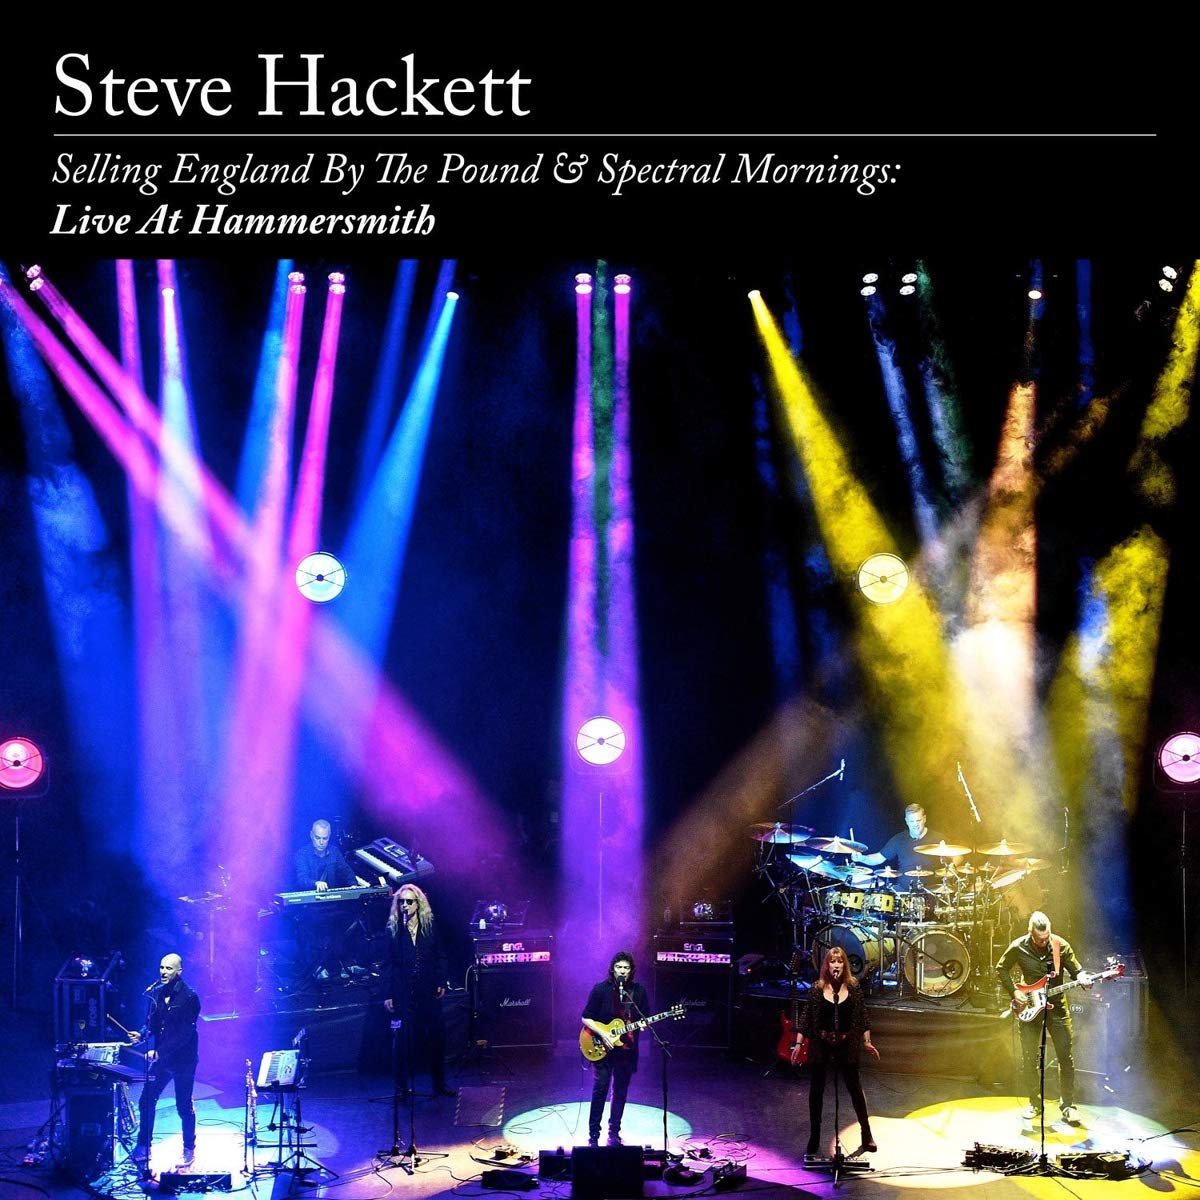 Steve Hackett >Selling England By The Pound & Spectral Mornings: Live At Hammersmith